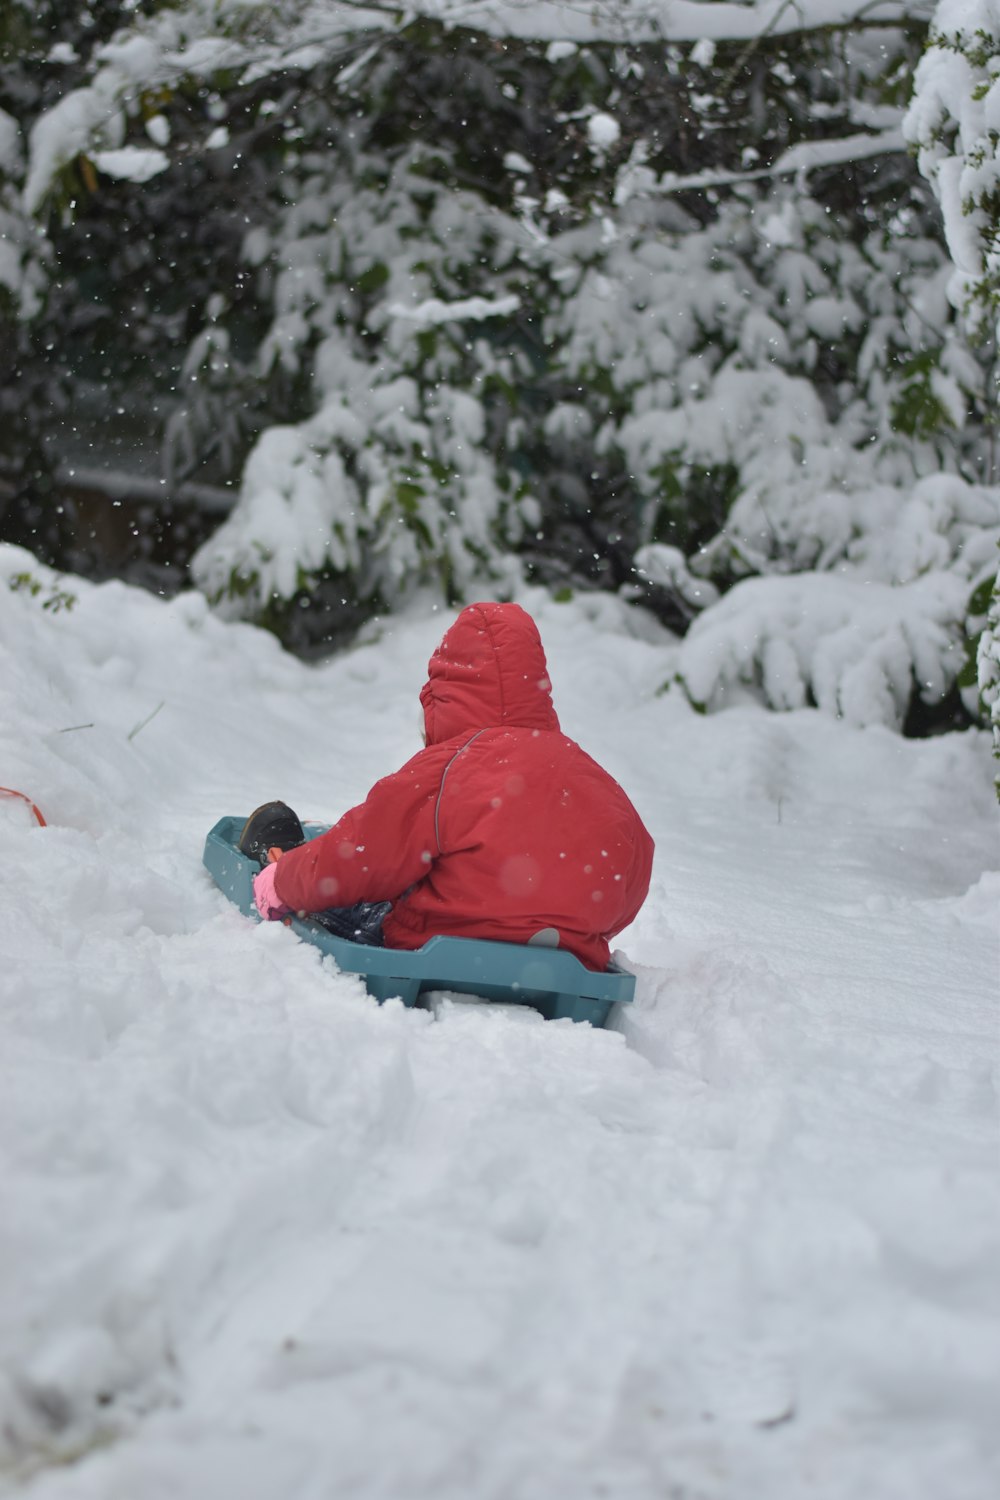 a young child sitting in the snow on a sled